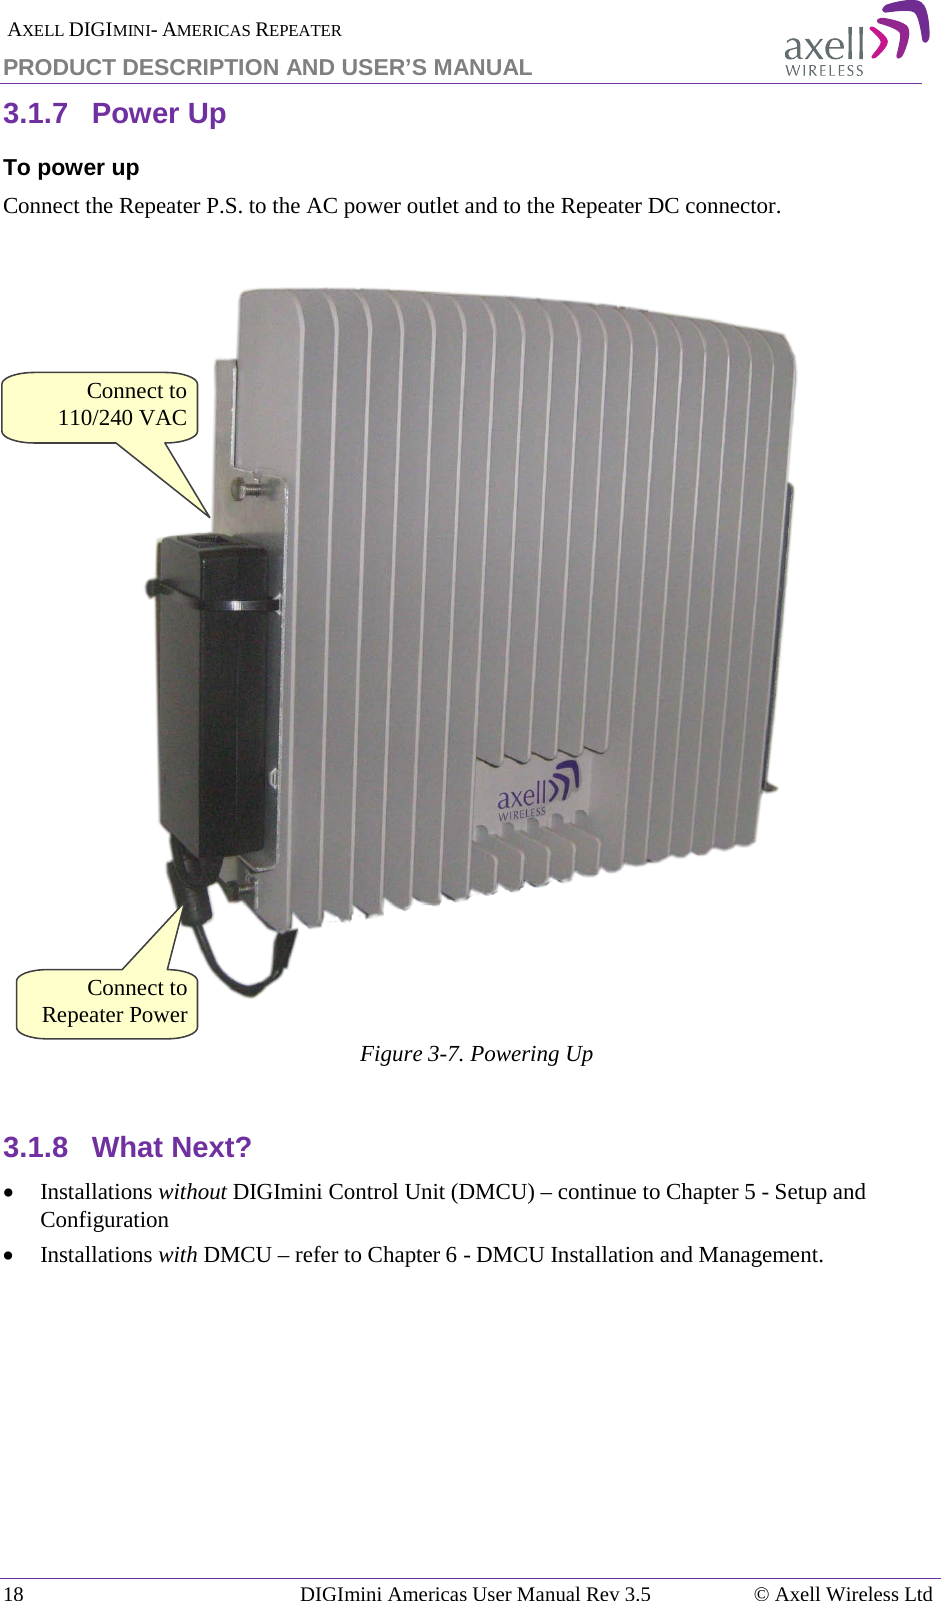  AXELL DIGIMINI- AMERICAS REPEATER PRODUCT DESCRIPTION AND USER’S MANUAL 18   DIGImini Americas User Manual Rev 3.5  © Axell Wireless Ltd 3.1.7  Power Up To power up Connect the Repeater P.S. to the AC power outlet and to the Repeater DC connector.    Figure  3-7. Powering Up  3.1.8  What Next? • Installations without DIGImini Control Unit (DMCU) – continue to Chapter  5 - Setup and Configuration  • Installations with DMCU – refer to Chapter  6 - DMCU Installation and Management.    Connect to Repeater Power Connect to 110/240 VAC 